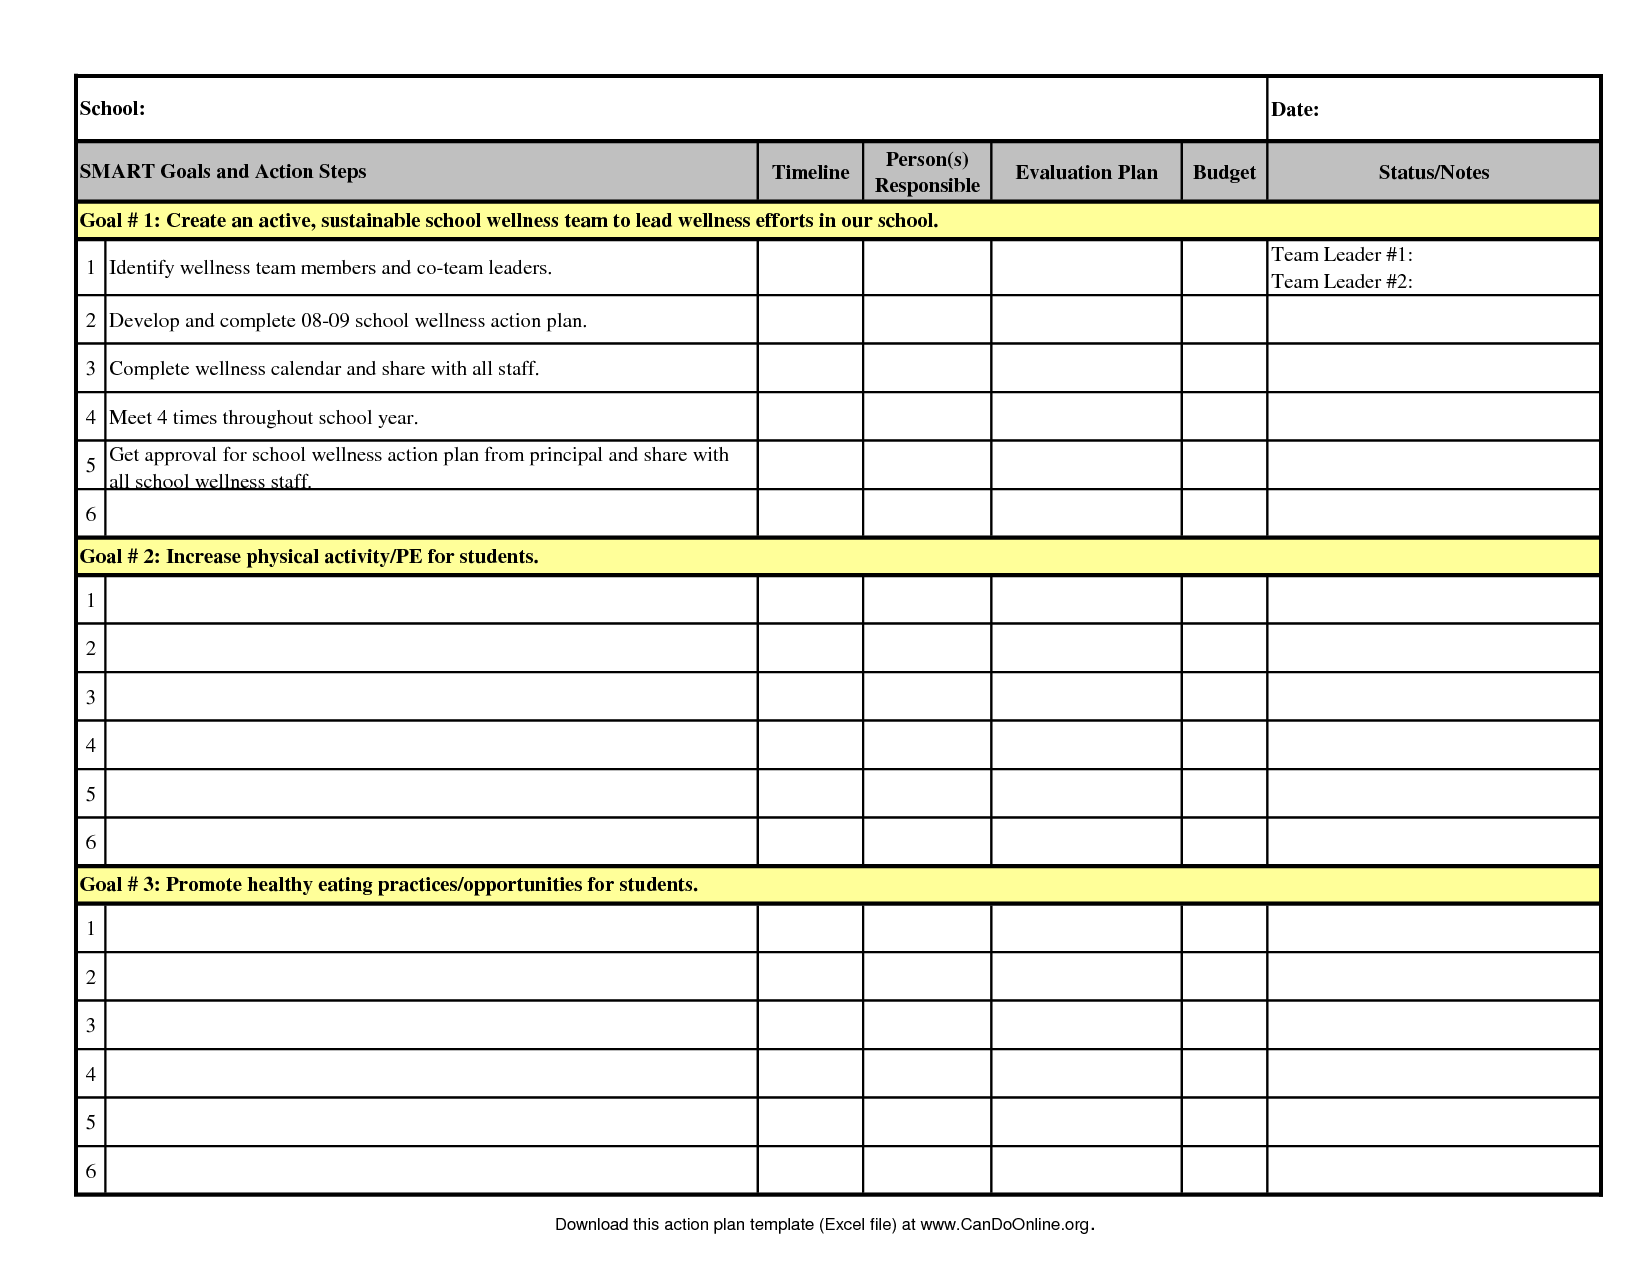 ms word action plan template   Ecza.solinf.co